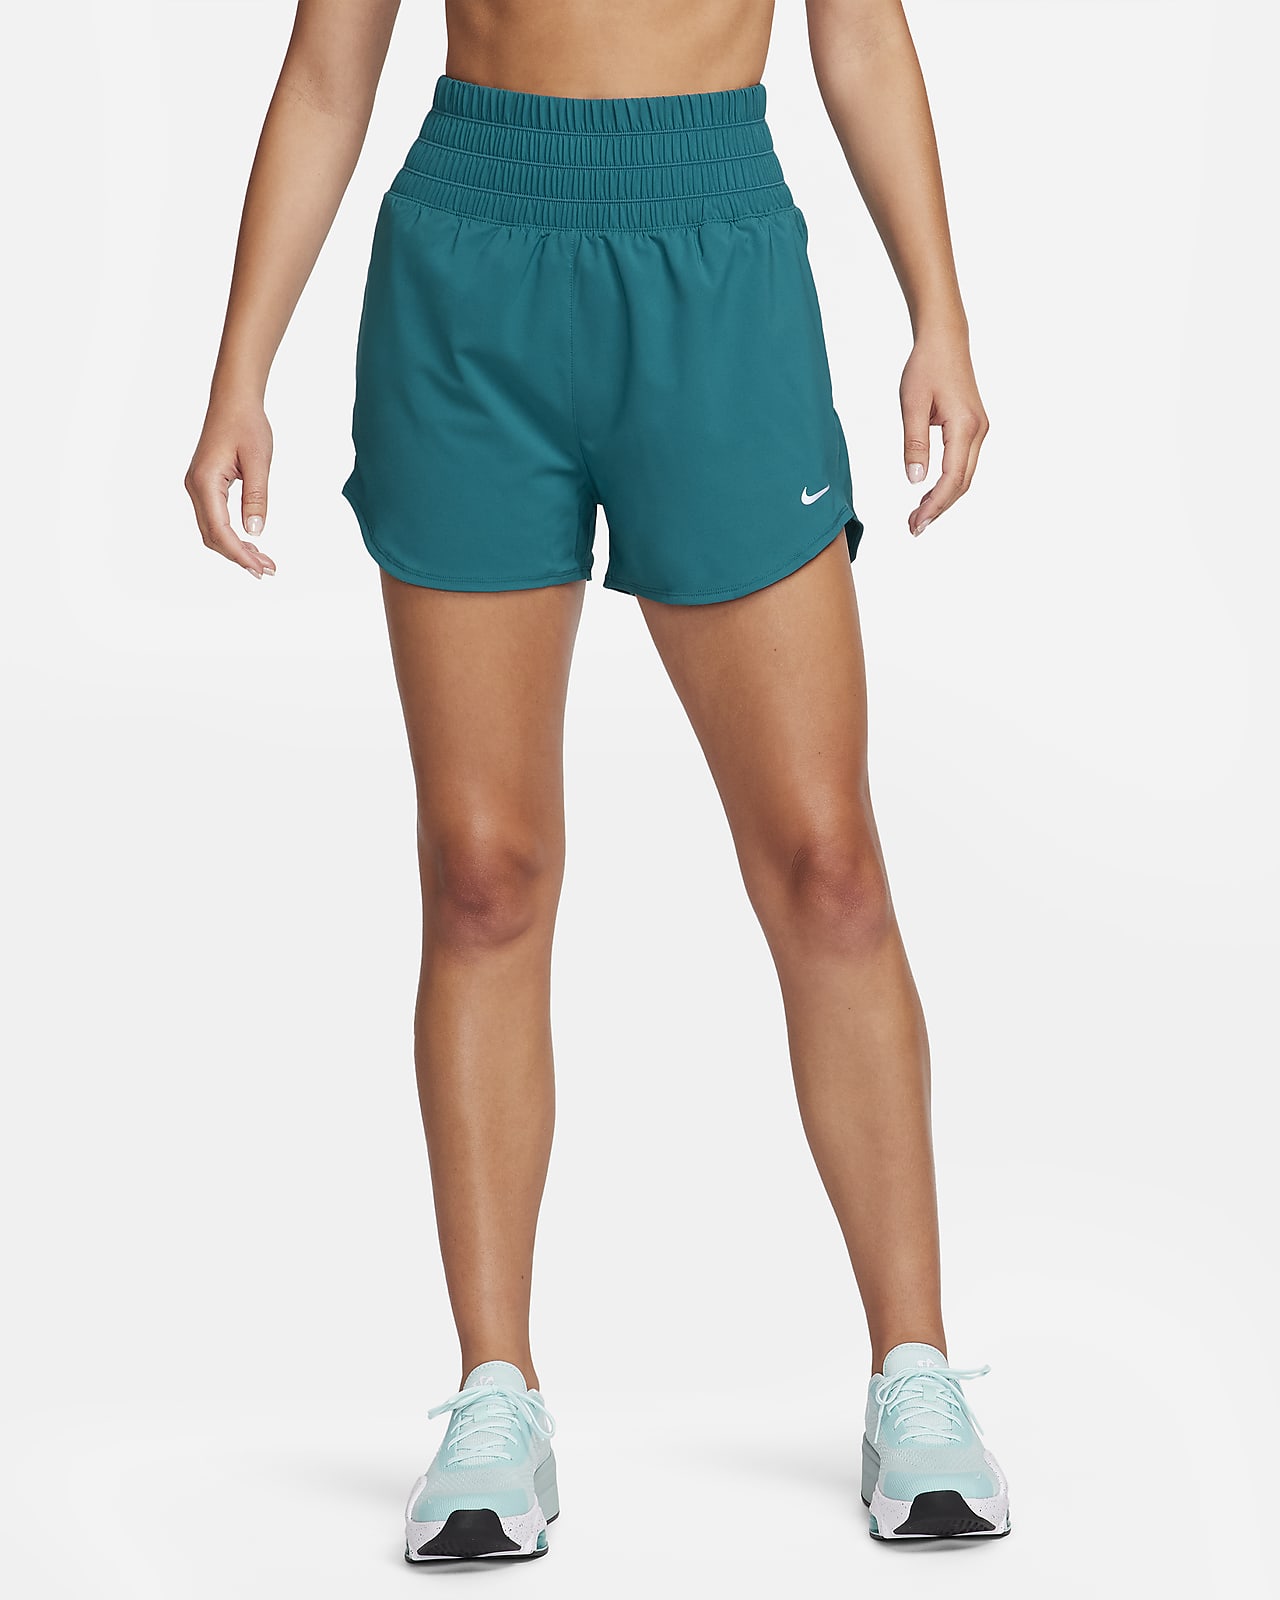 Nike One Dri-FIT Ultra High-Waisted 3" Brief-Lined Shorts.